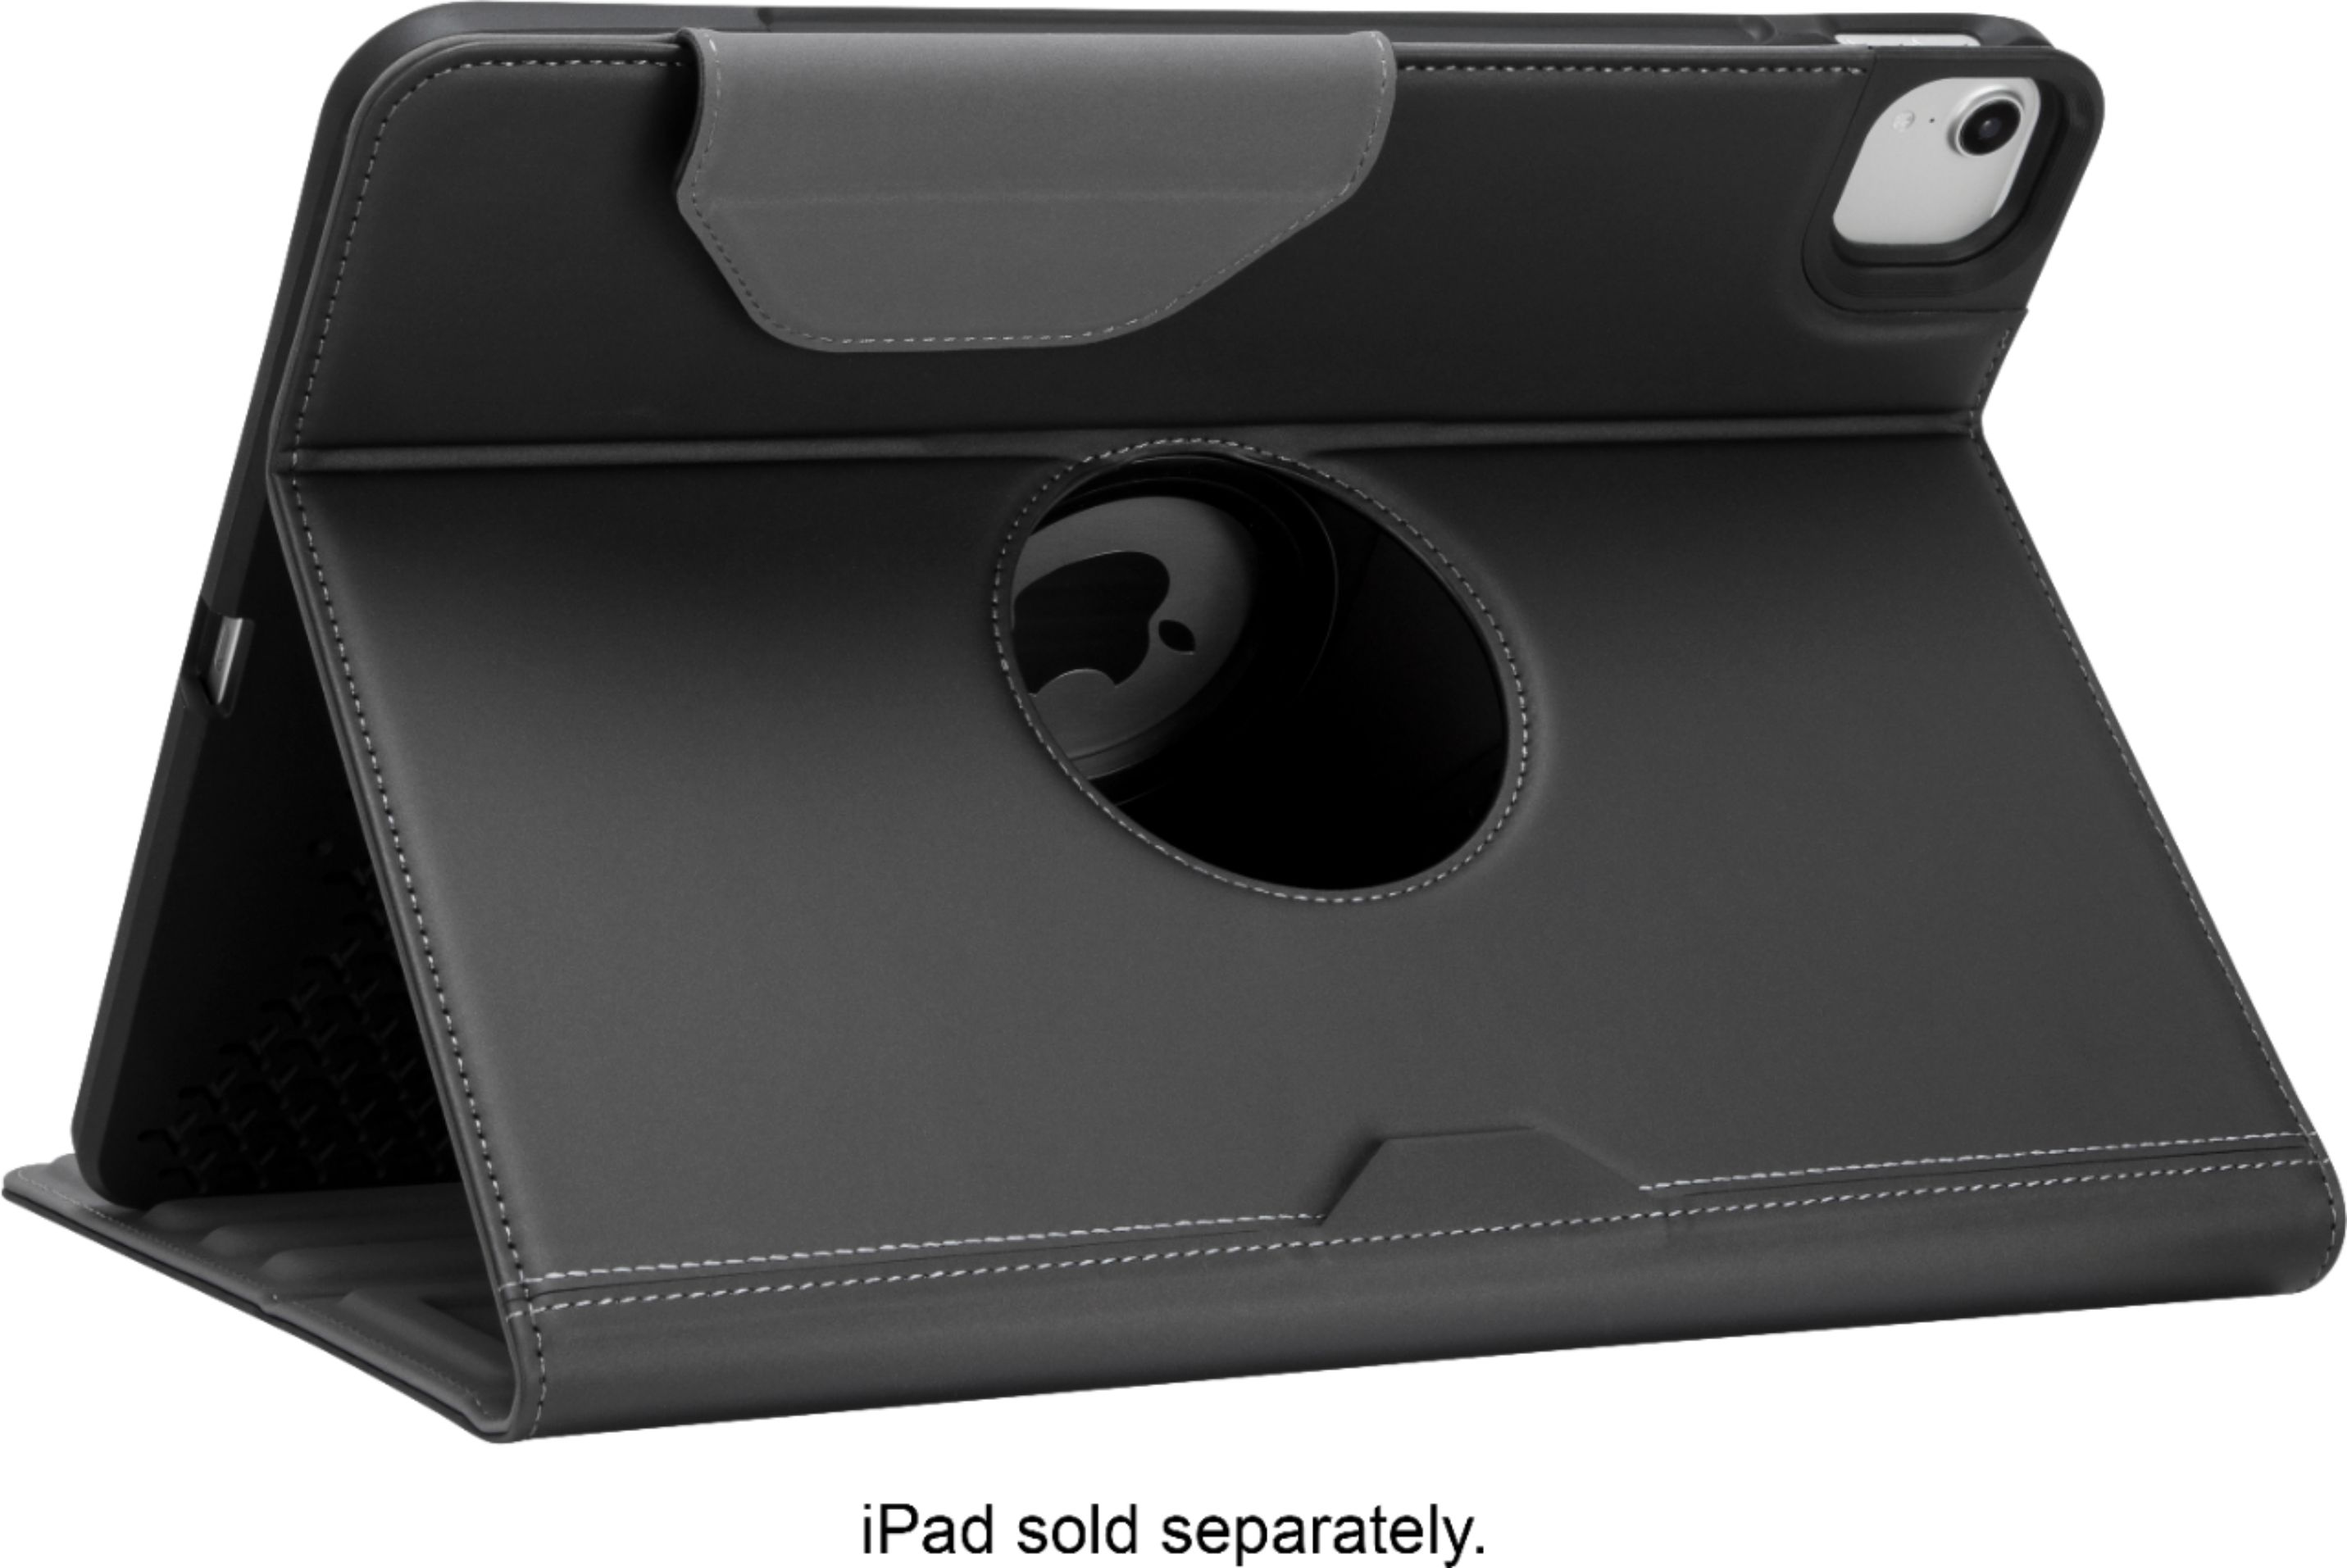 3 Tips to Select the Best Designer iPad Cases for College Students by Senor  Cases - Issuu